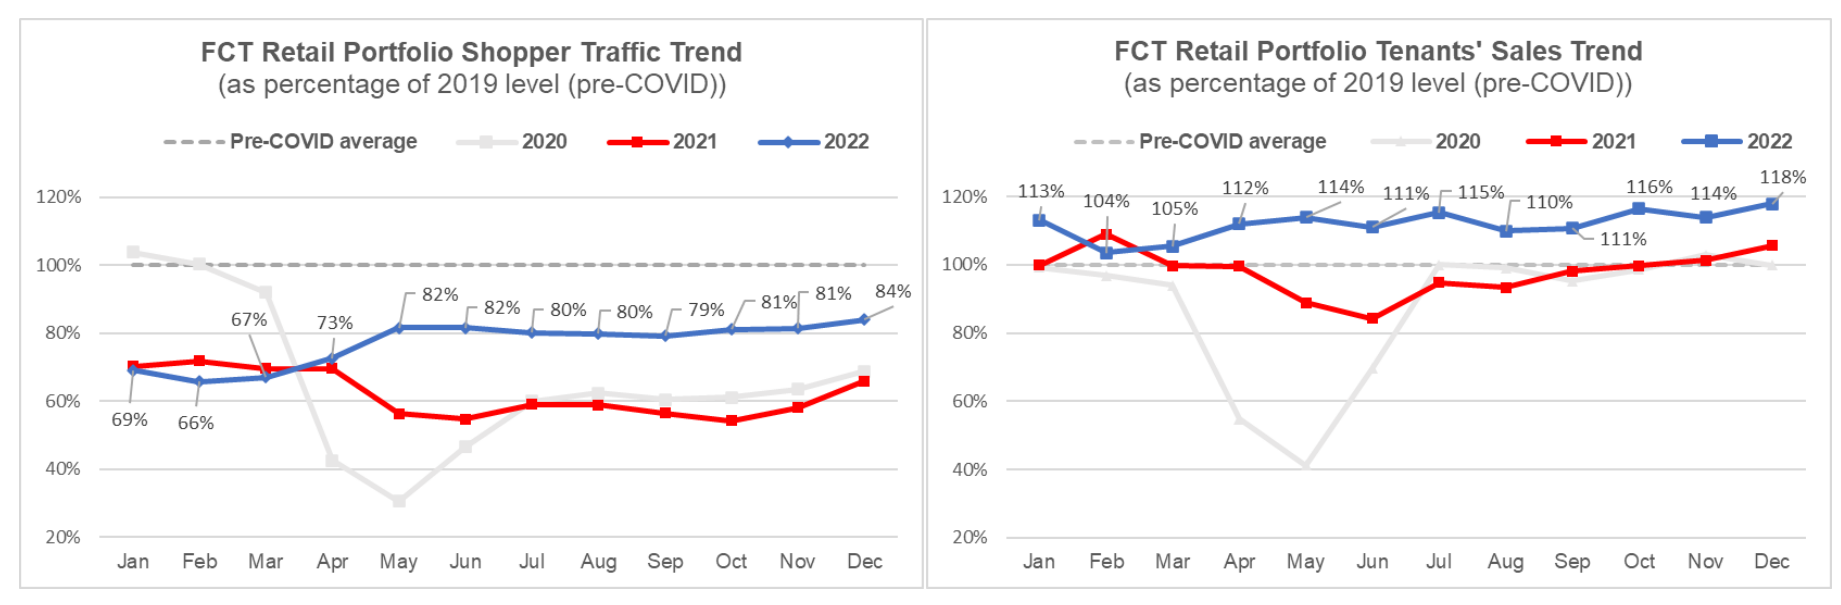 Frasers Centrepoint Trust Q1 Business Update: Retail Sales and Shopper Traffic